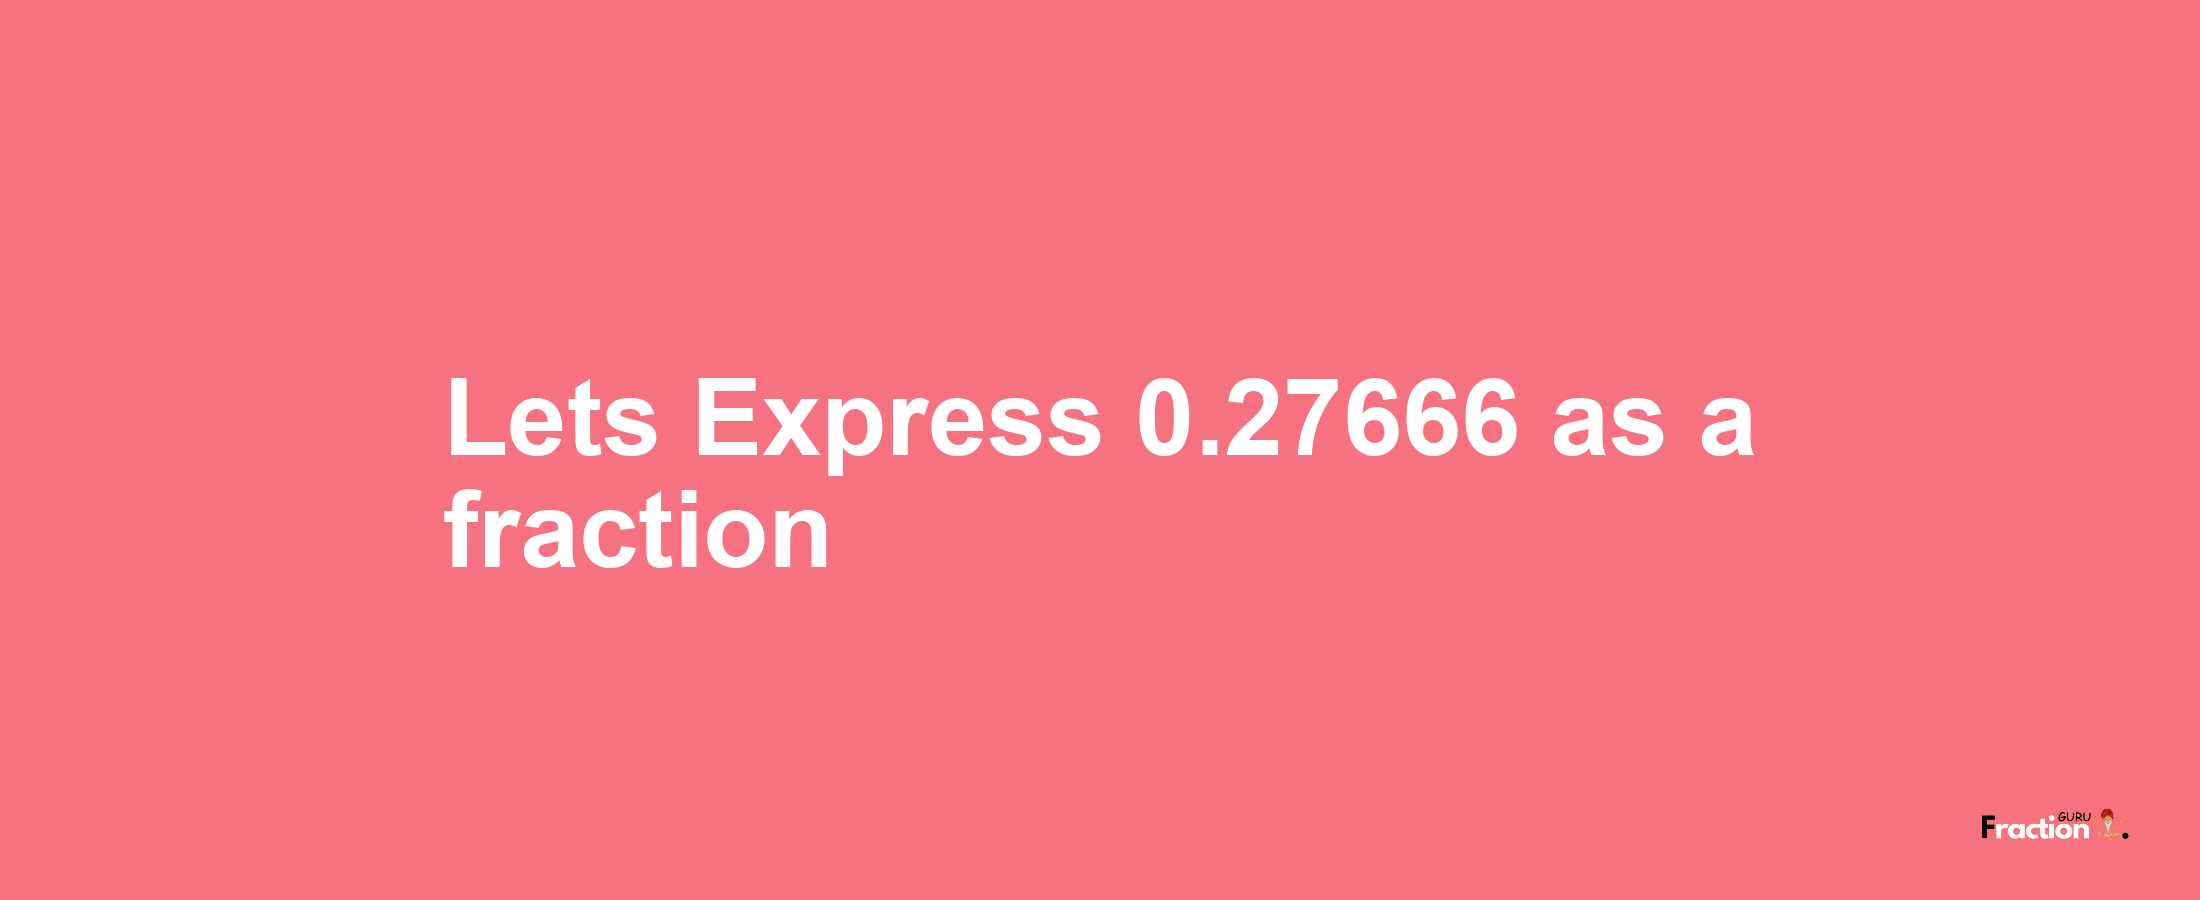 Lets Express 0.27666 as afraction